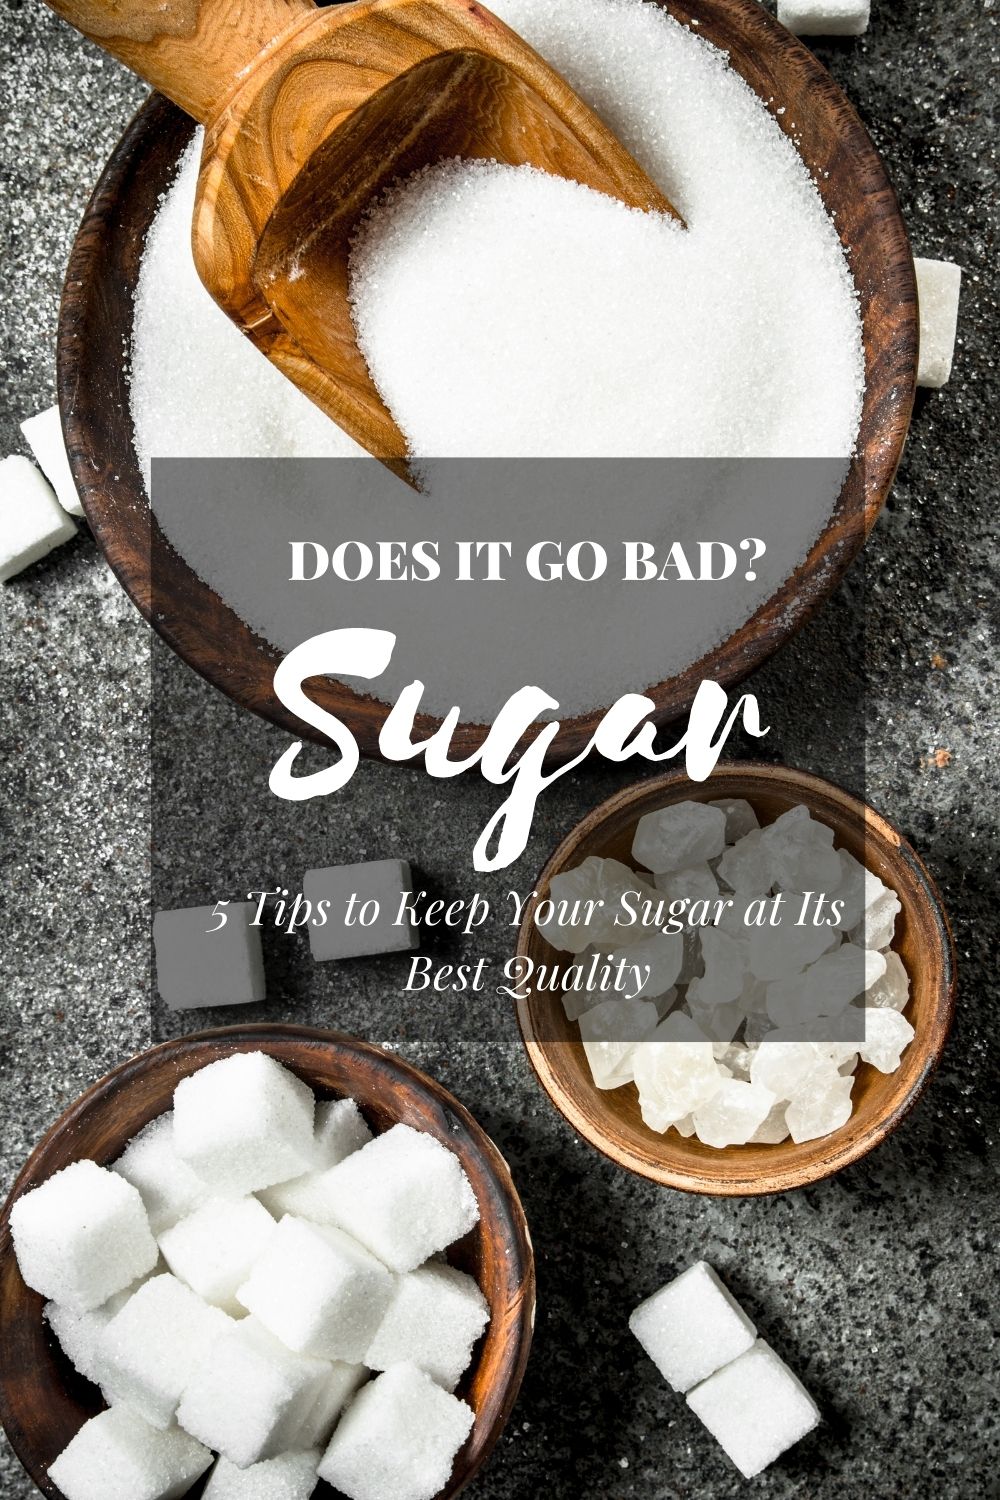 Does Sugar Go Bad? 5 Tips to Keep Your Sugar at Its Best Quality